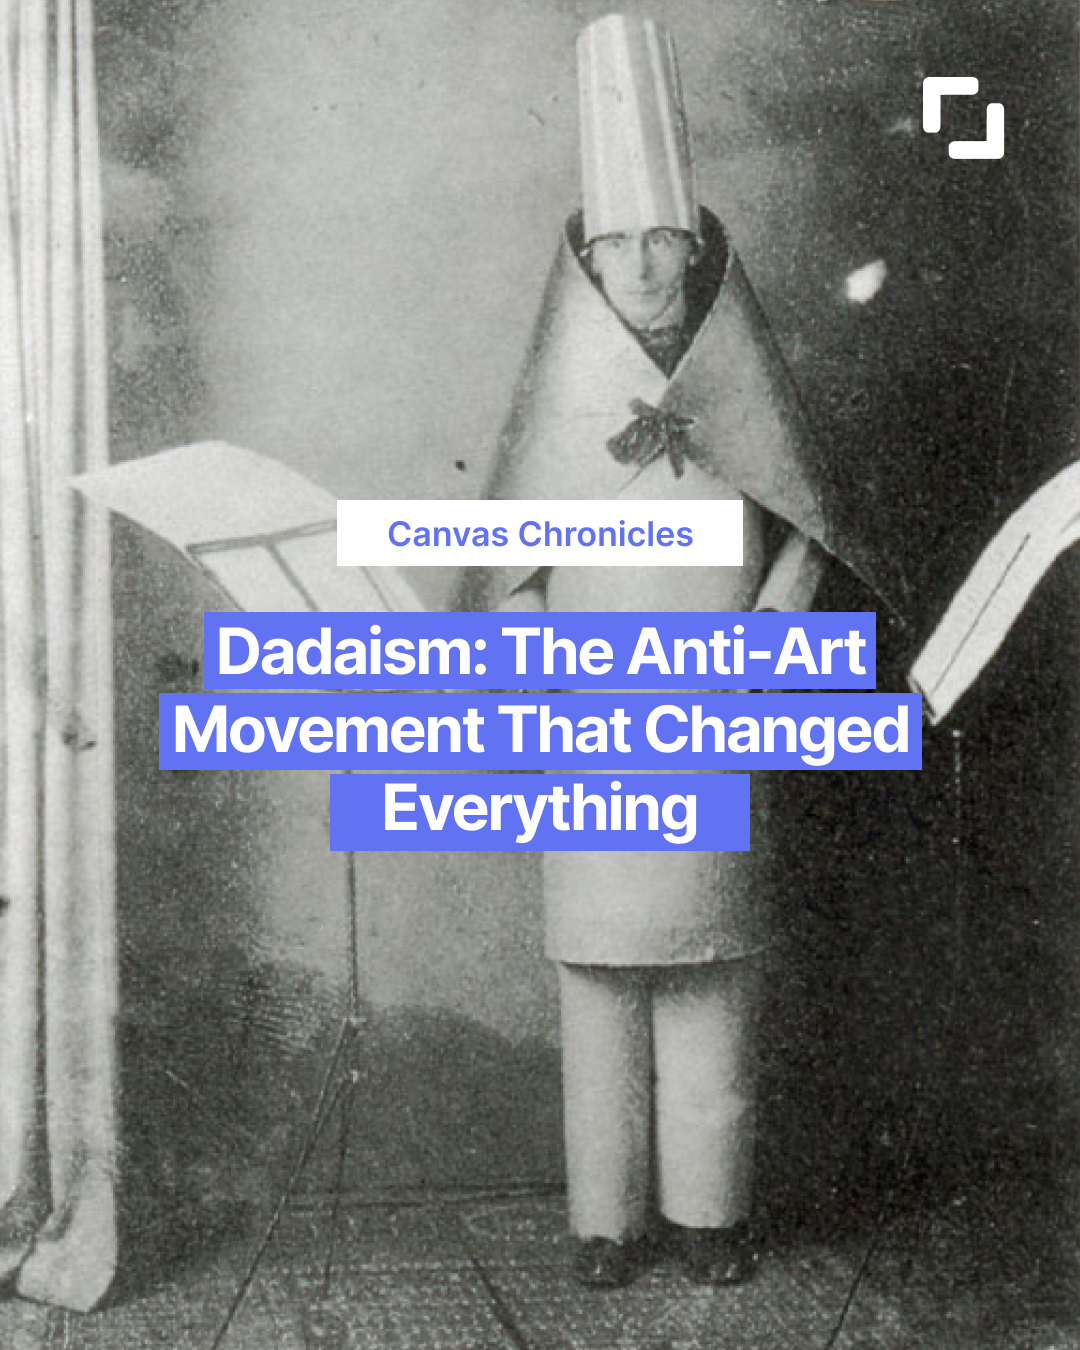 Dadaism: The Anti-Art Movement That Changed Everything